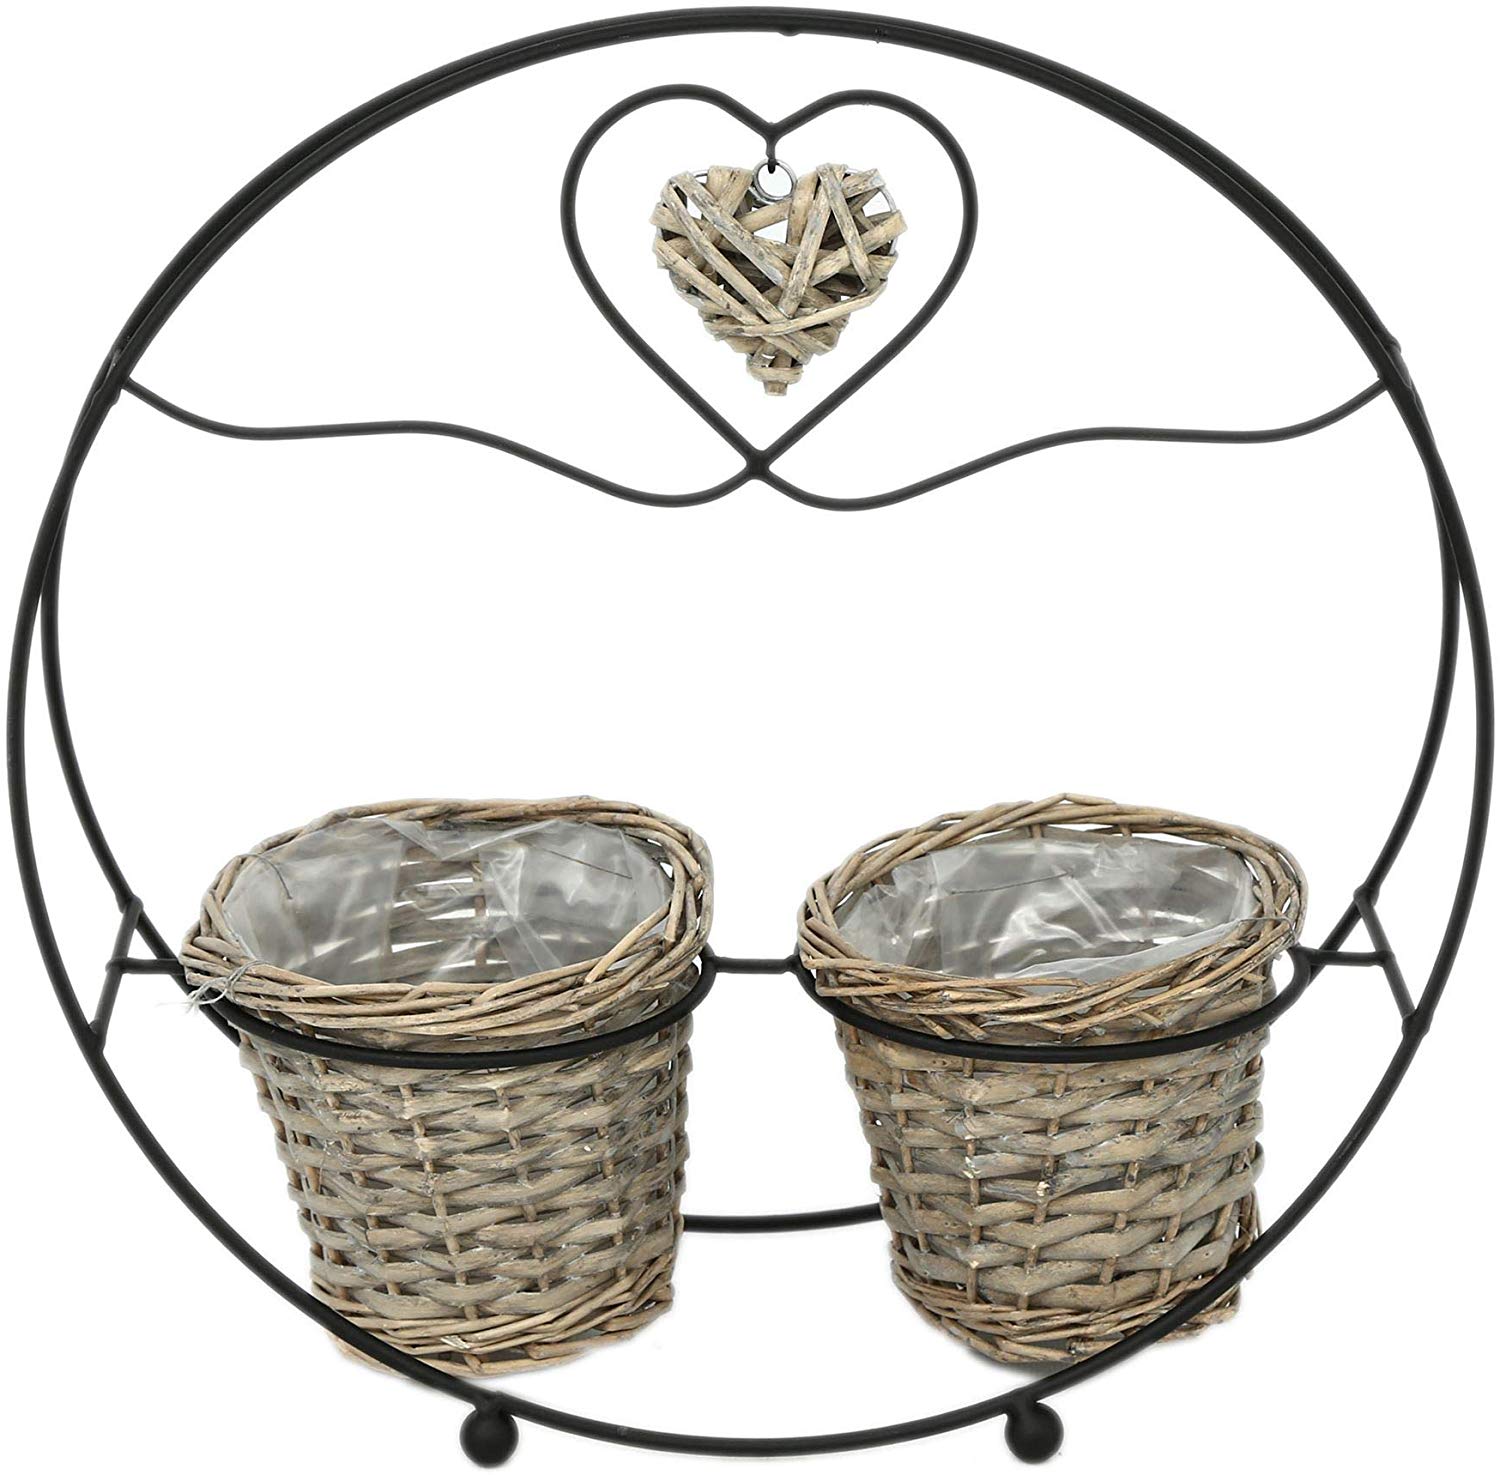 Carousel Home and Gifts Black Metal Round Willow Twin Plant Pot Stand Garden Planters